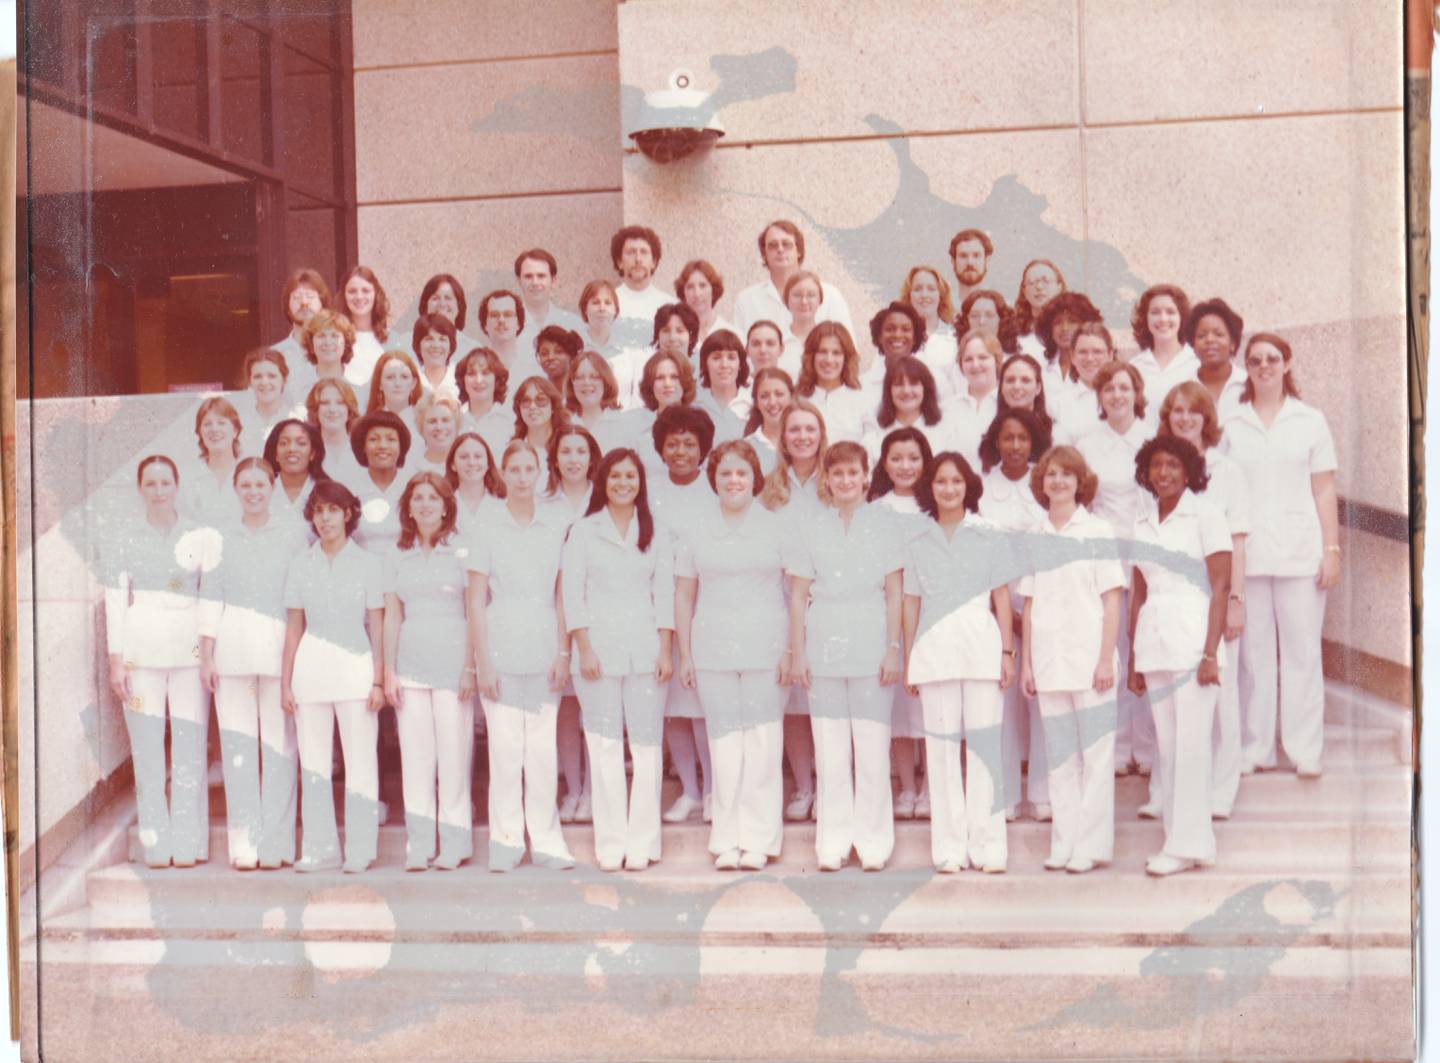 An old photo of Dr Fatima Al Refaei and her classmates at Texas Women's University in December 1979. Dr Al Refaei is in the first row, third from the left. Photo: Dr Fatima Al Refaei's family / Abu Dhabi Awards


